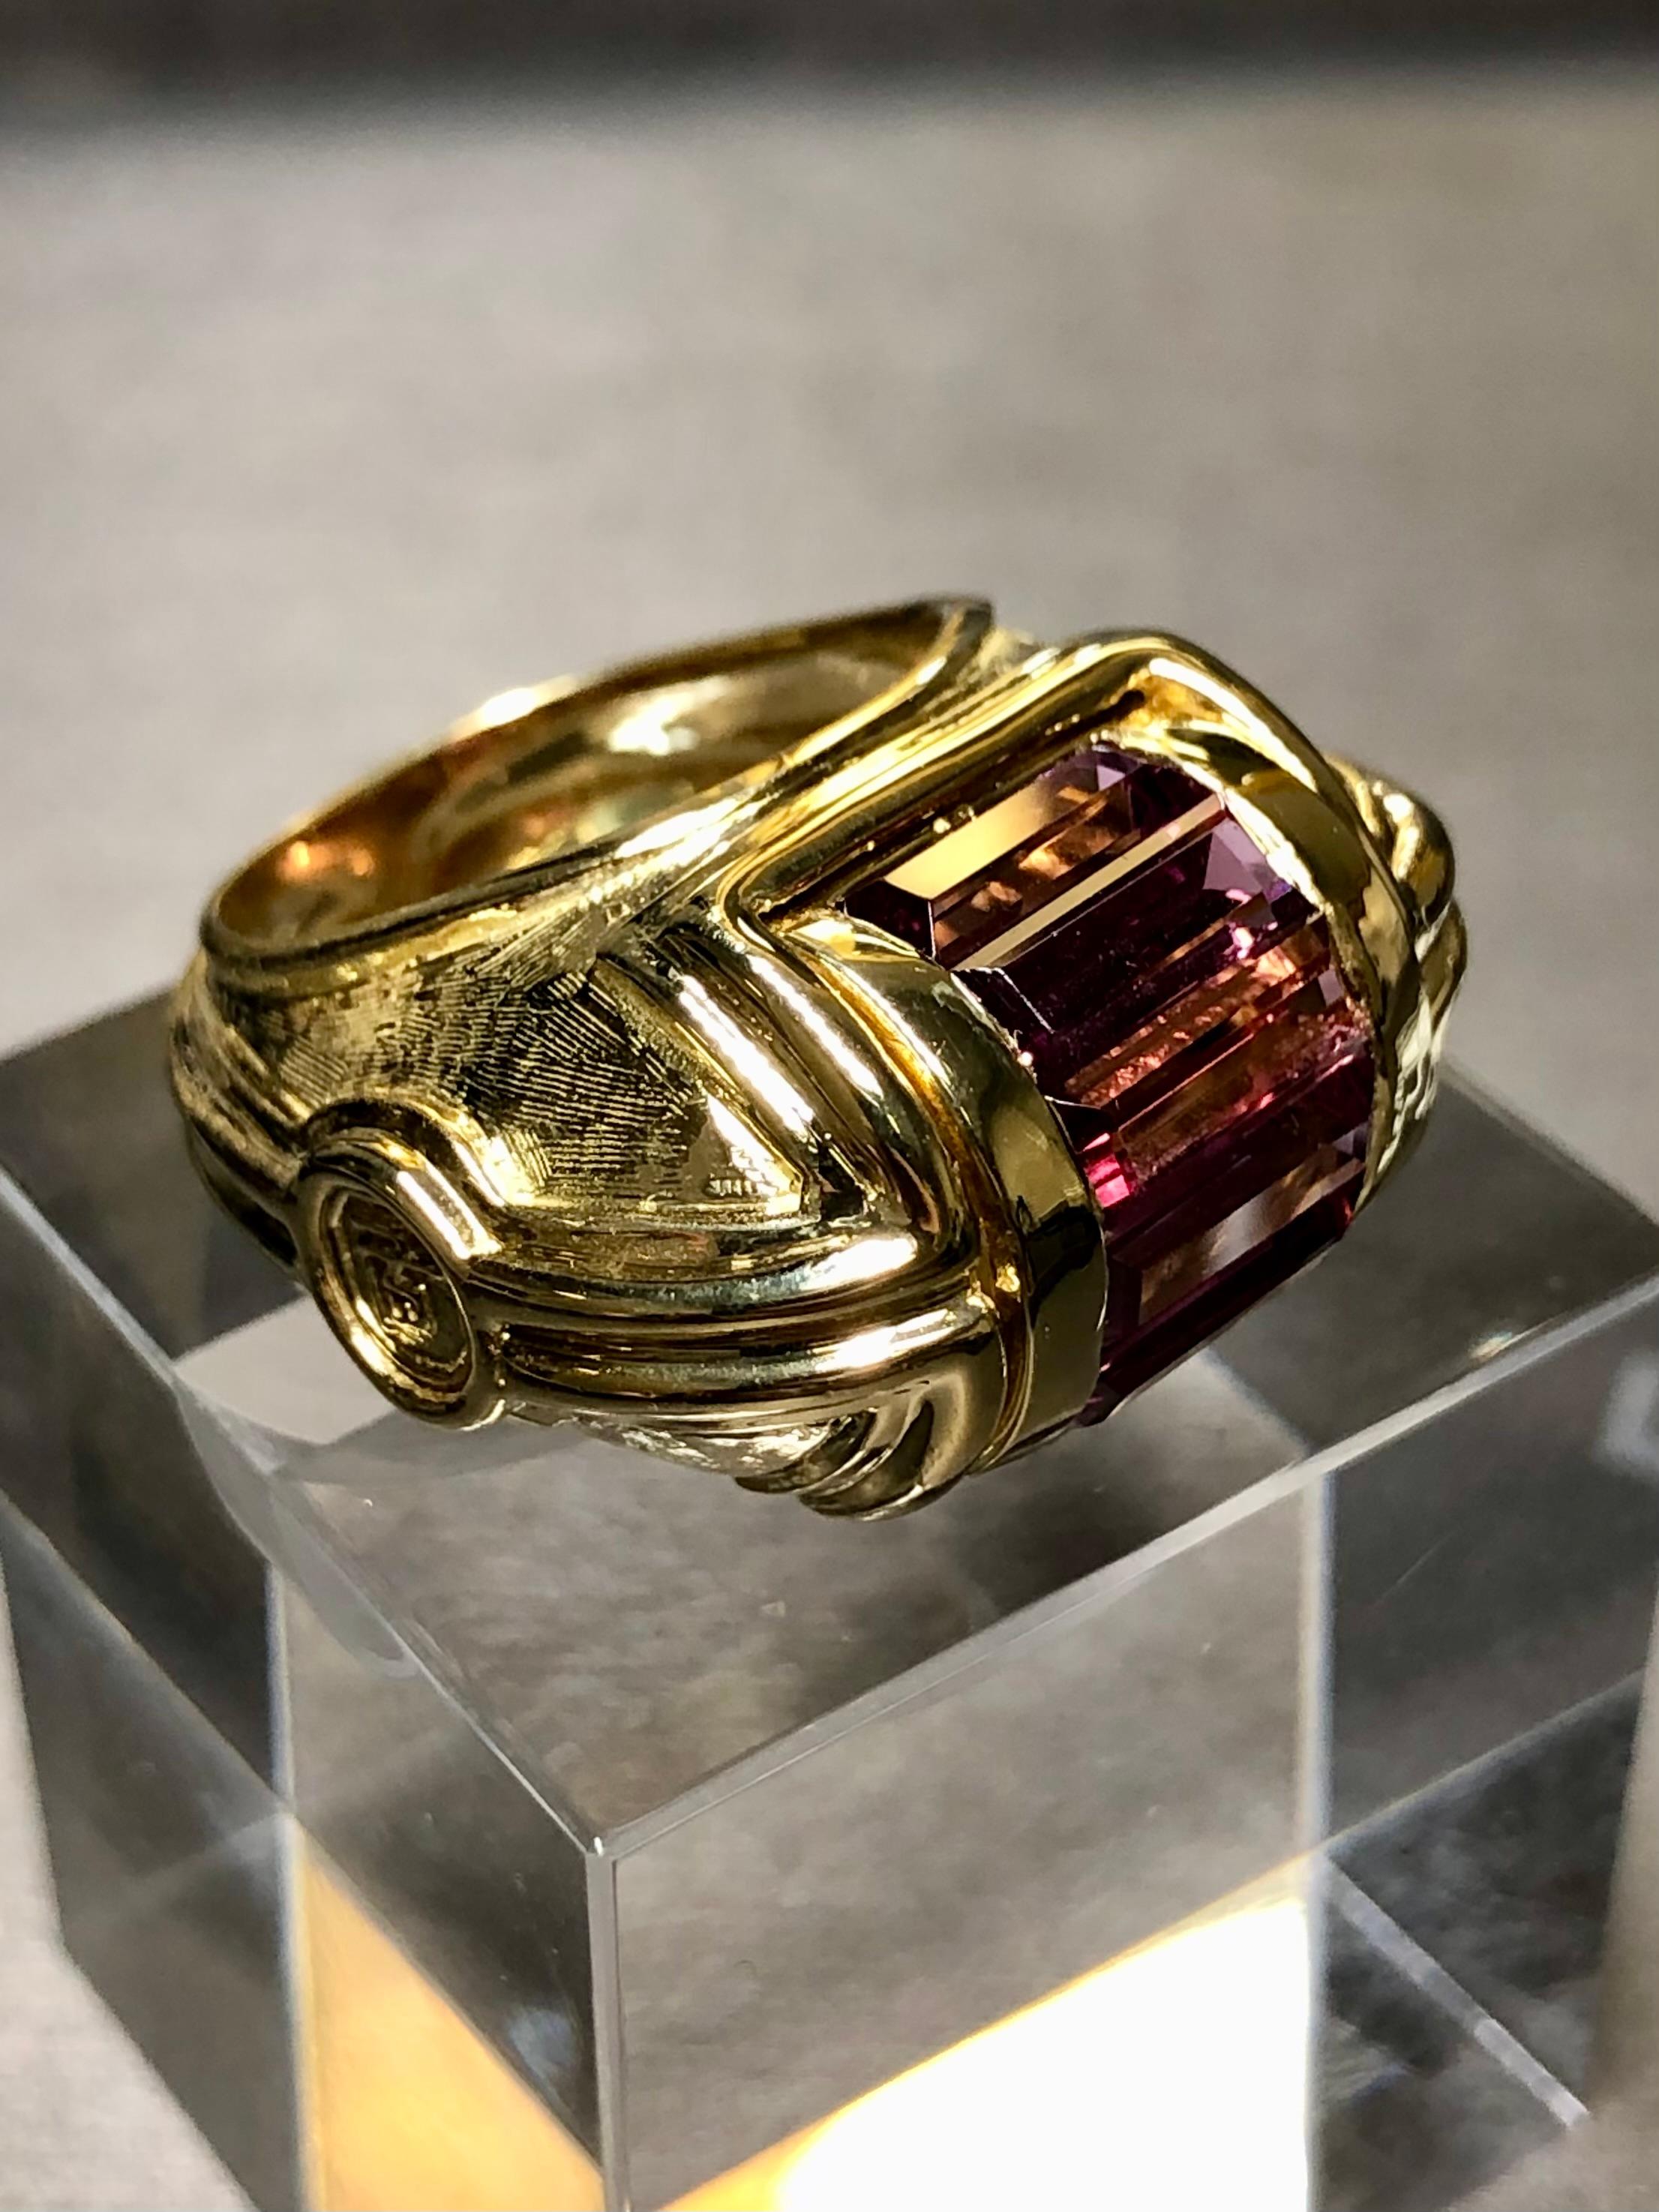 
A contemporary and bold ring done in heavy 18k yellow gold set with approximately 12cttw in natural elongated tourmalines across the center. This ring IS done by a particular designer, but no one that we are familiar with unfortunately. Beautifully